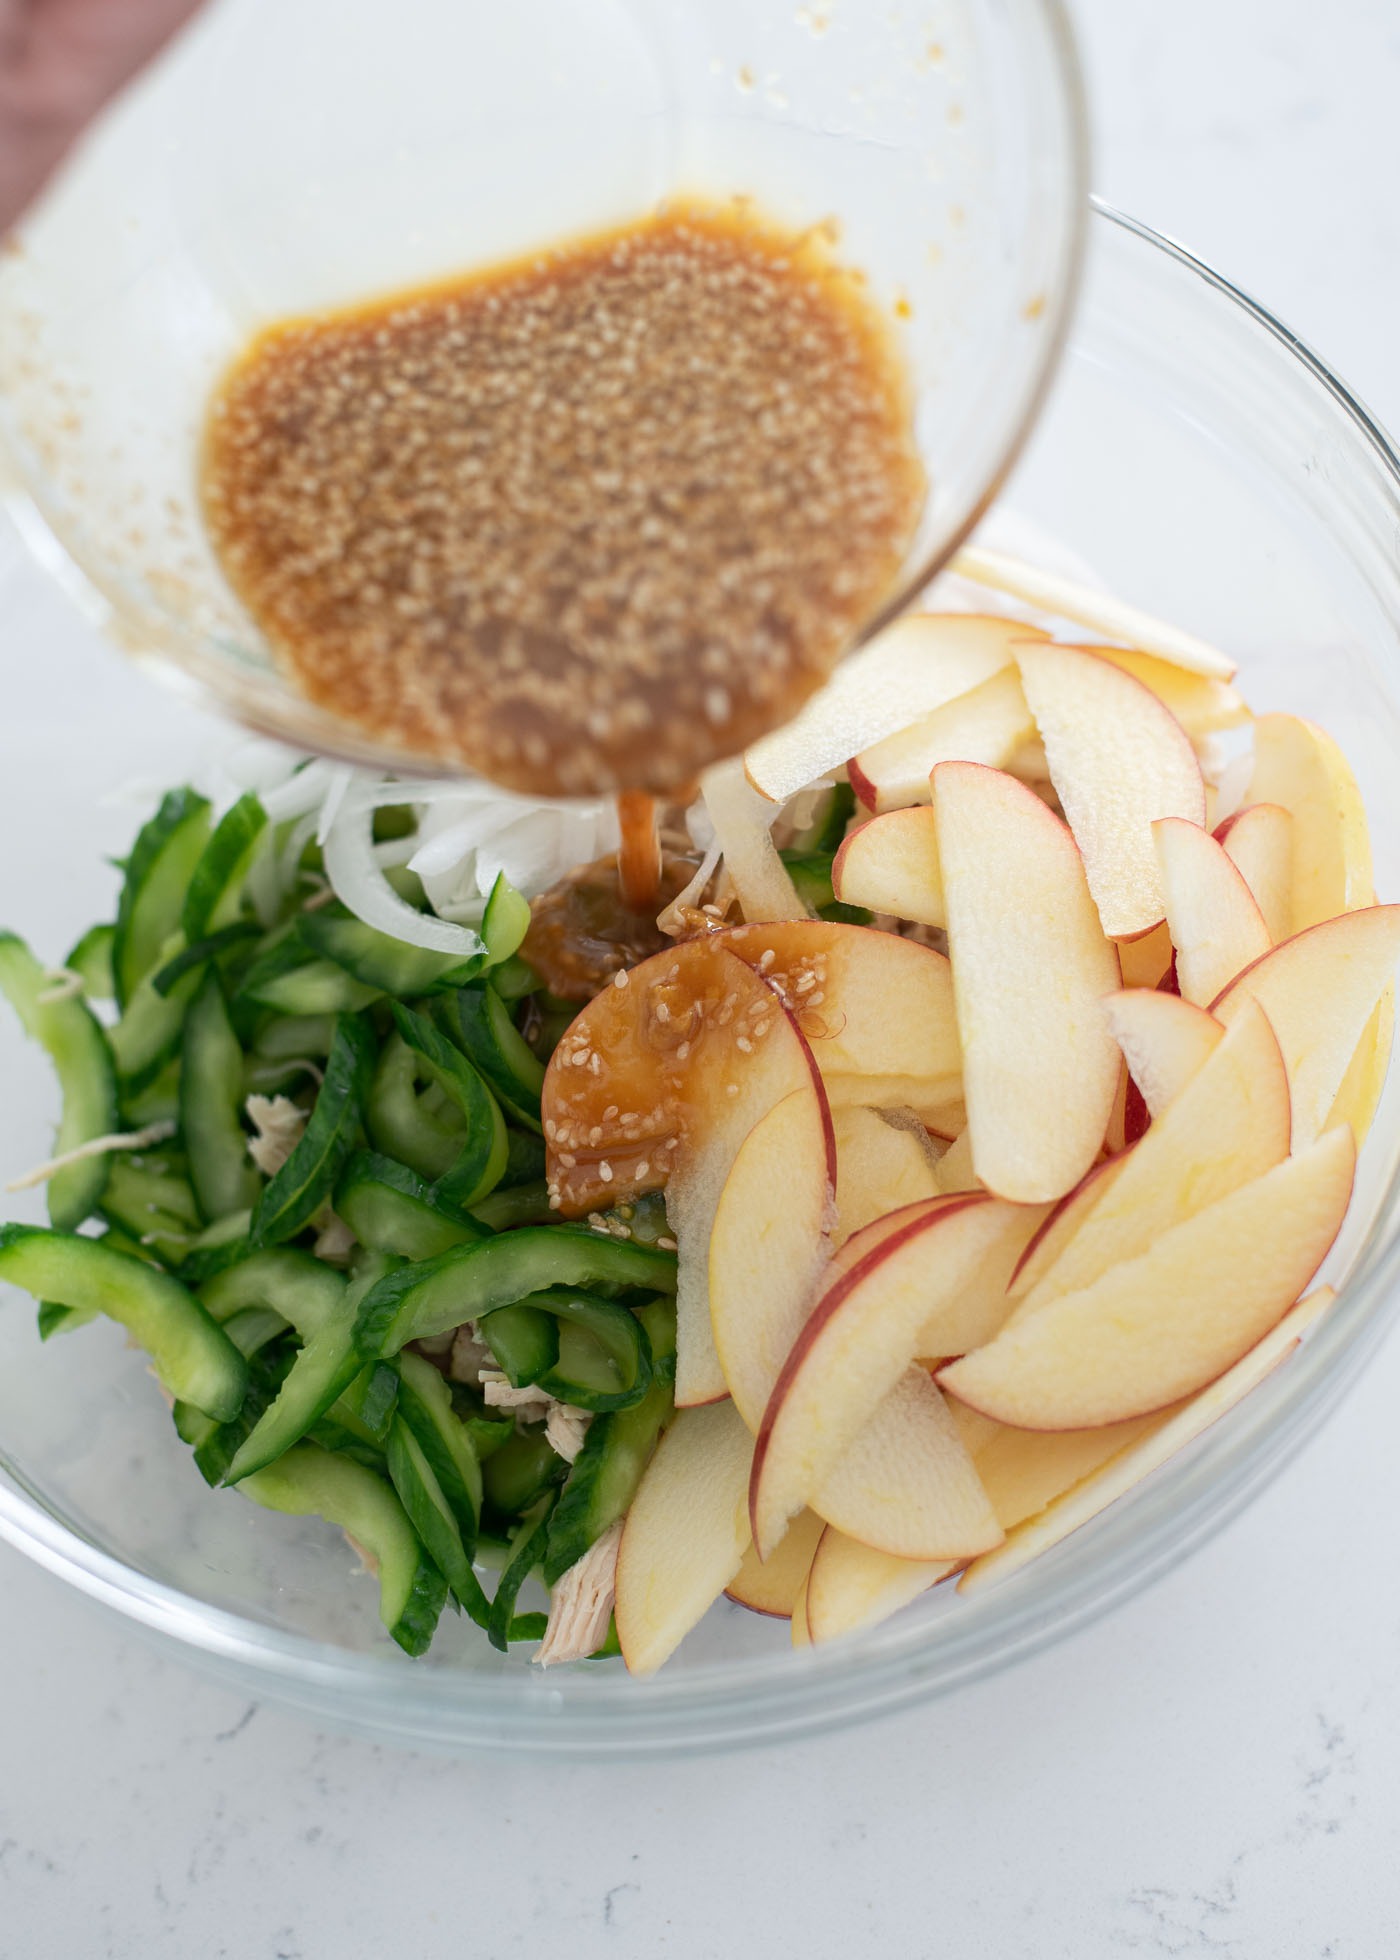 Sesame seed salad dressing is being poured on chicken, apple, and cucumber in a mixing bowl.